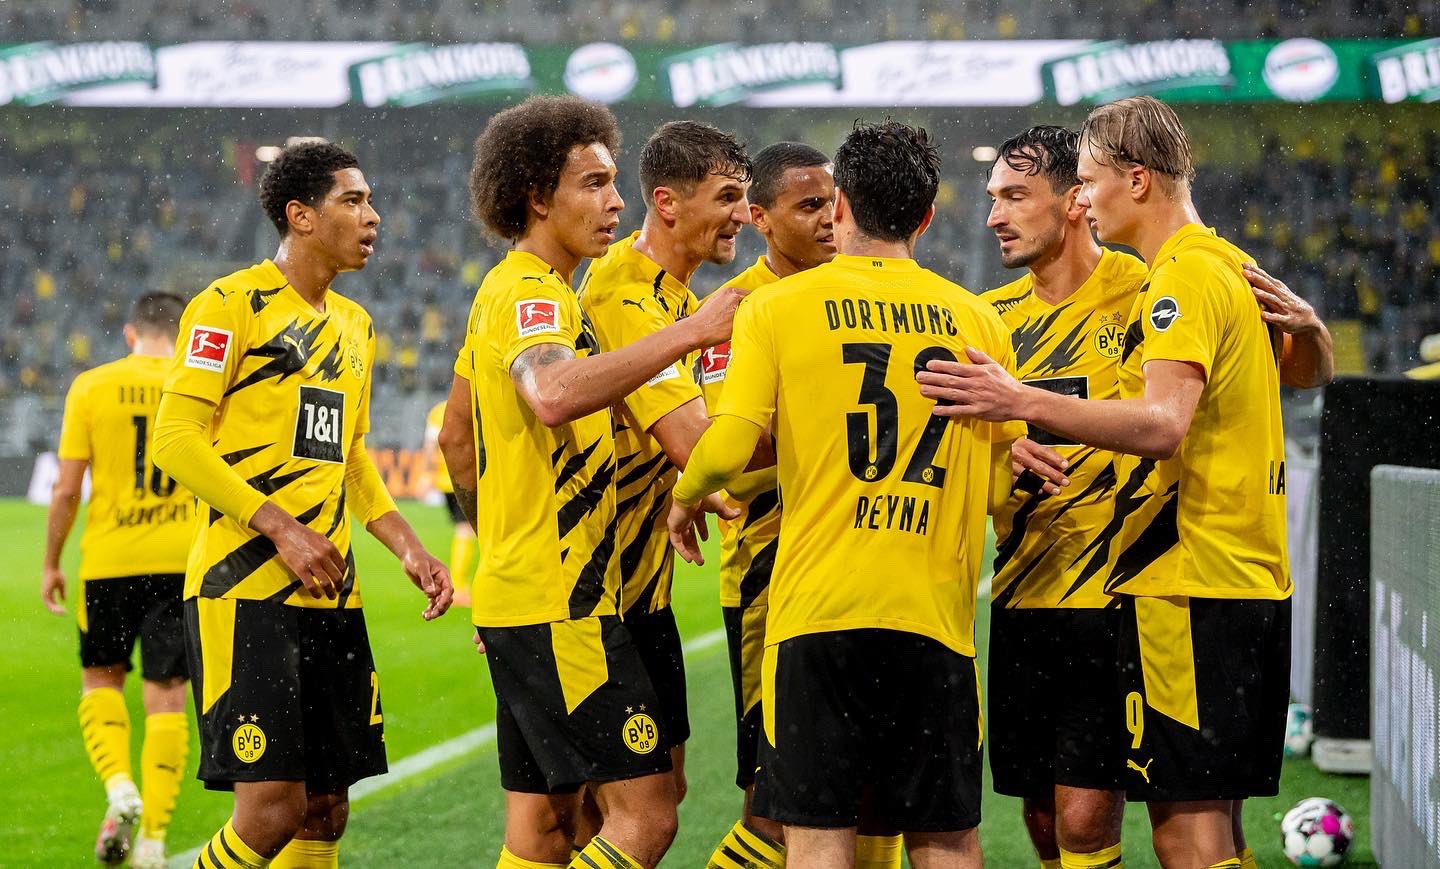 Titles? Trophies? Nah, Borussia Dortmund and their Yellow Army have better goal in mind